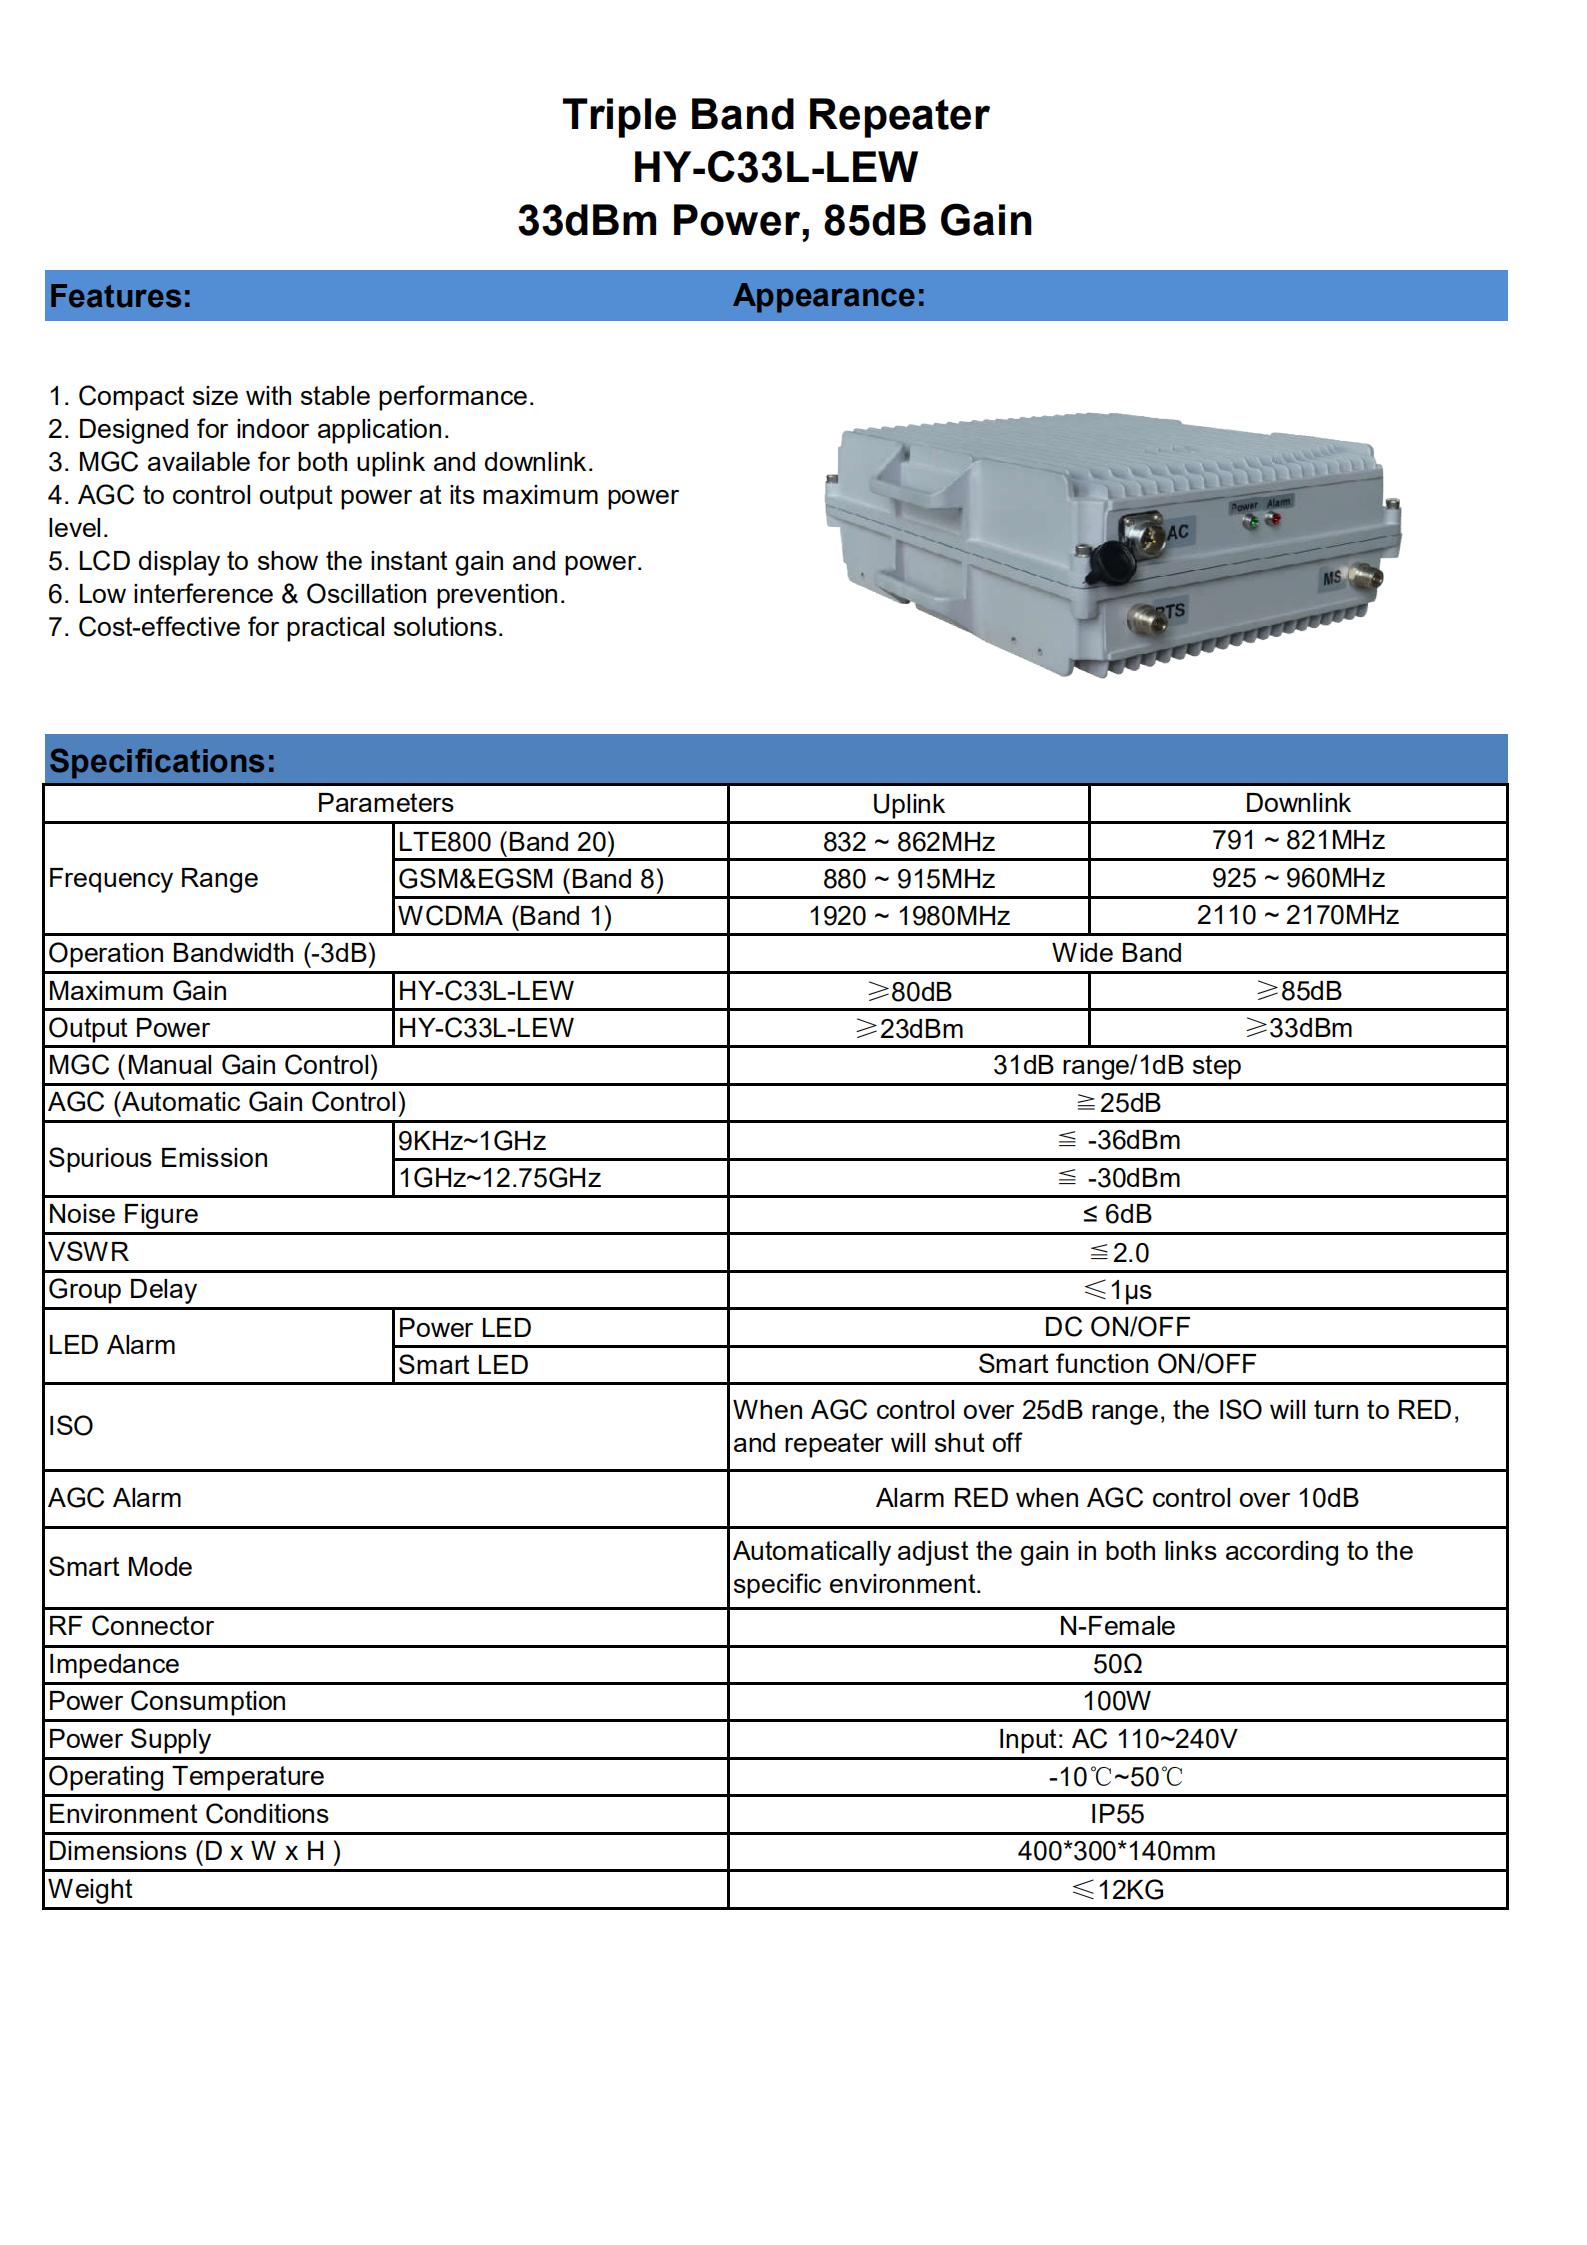 HY-C33L-LEW Specifications_00.jpg